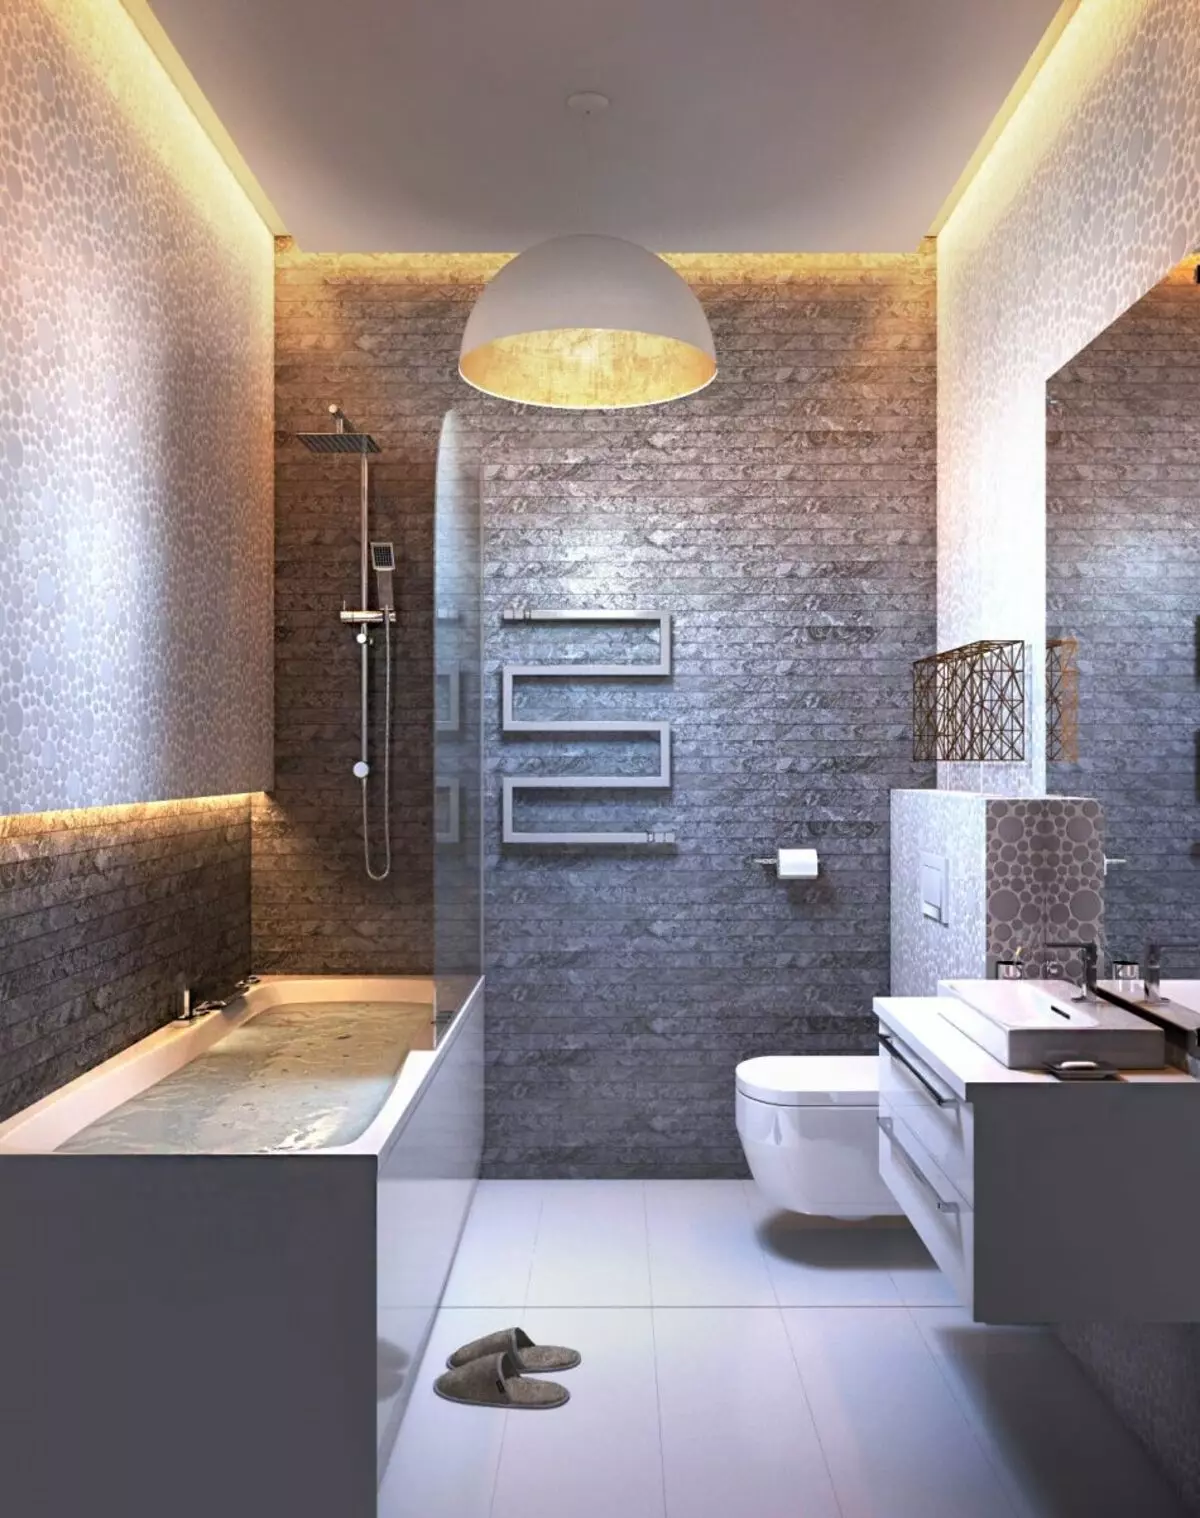 Compare the design of the bathroom in Russia and other countries of the world